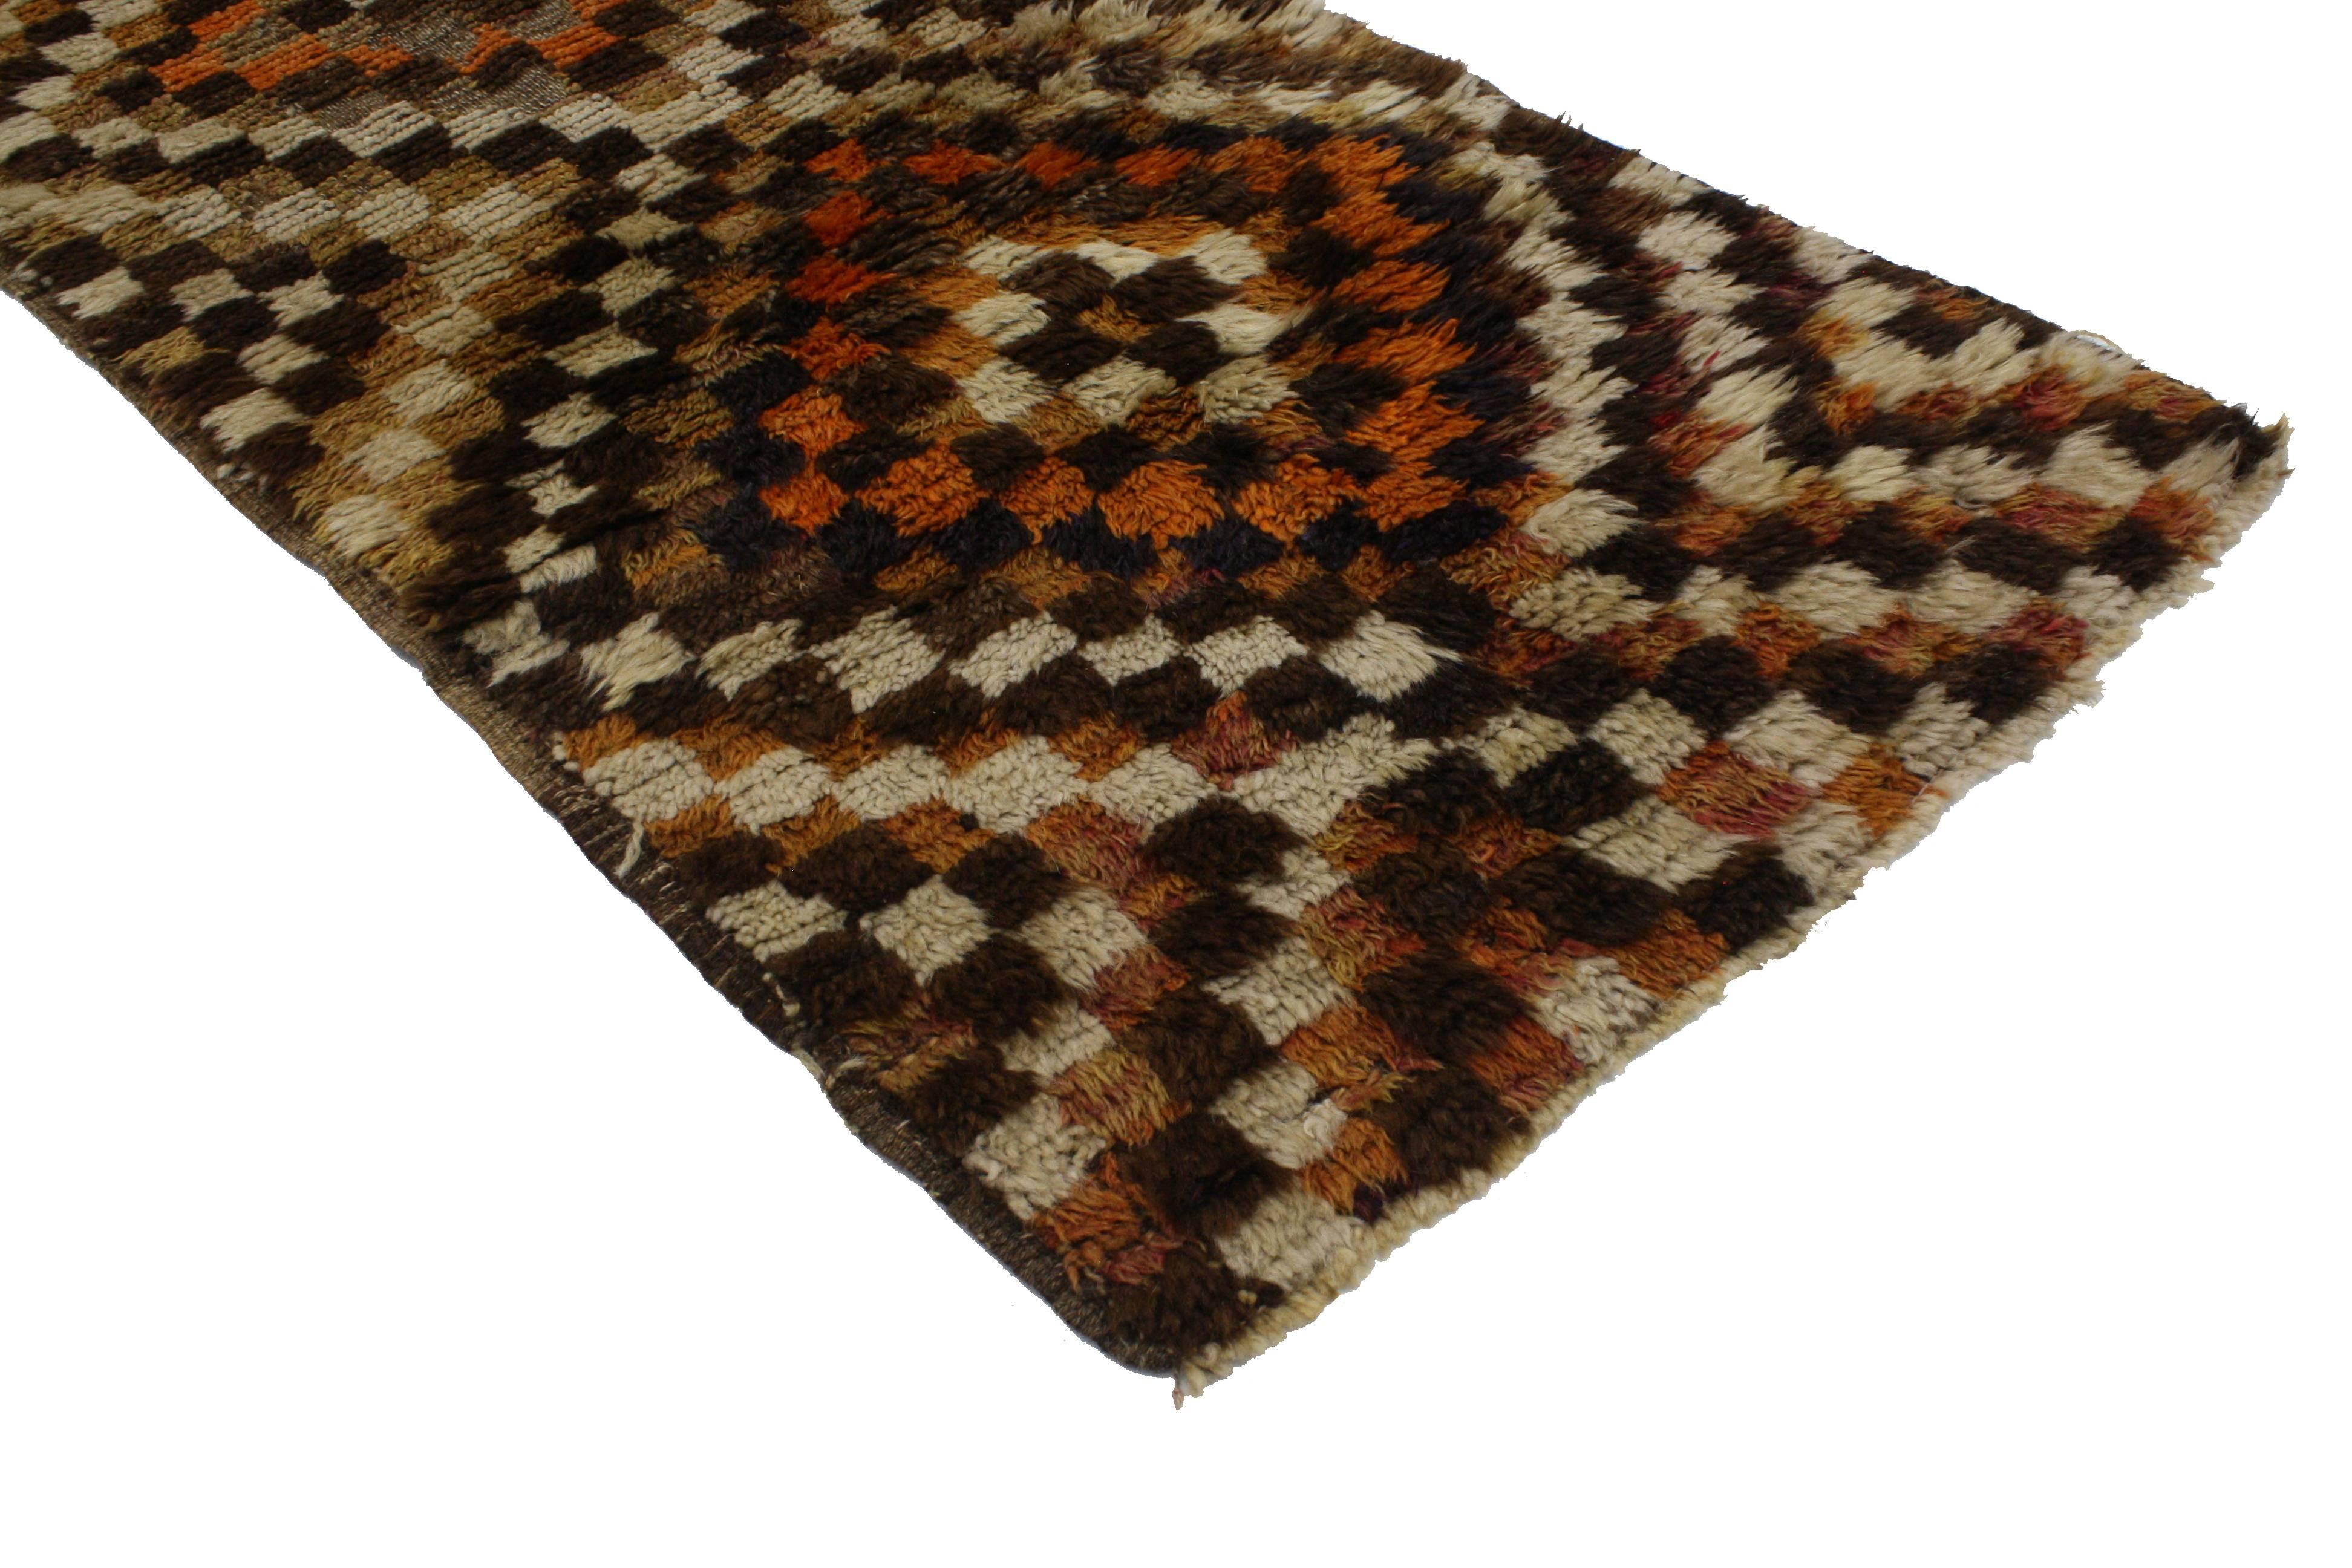 With its Primitive charm and checkered pattern, this Mid-Century Modern vintage Turkish Tulu runner synthesizes beautifully with modern architecture. Alternating blocks of warm earth tones form an all-over checkerboard pattern. While the simplistic